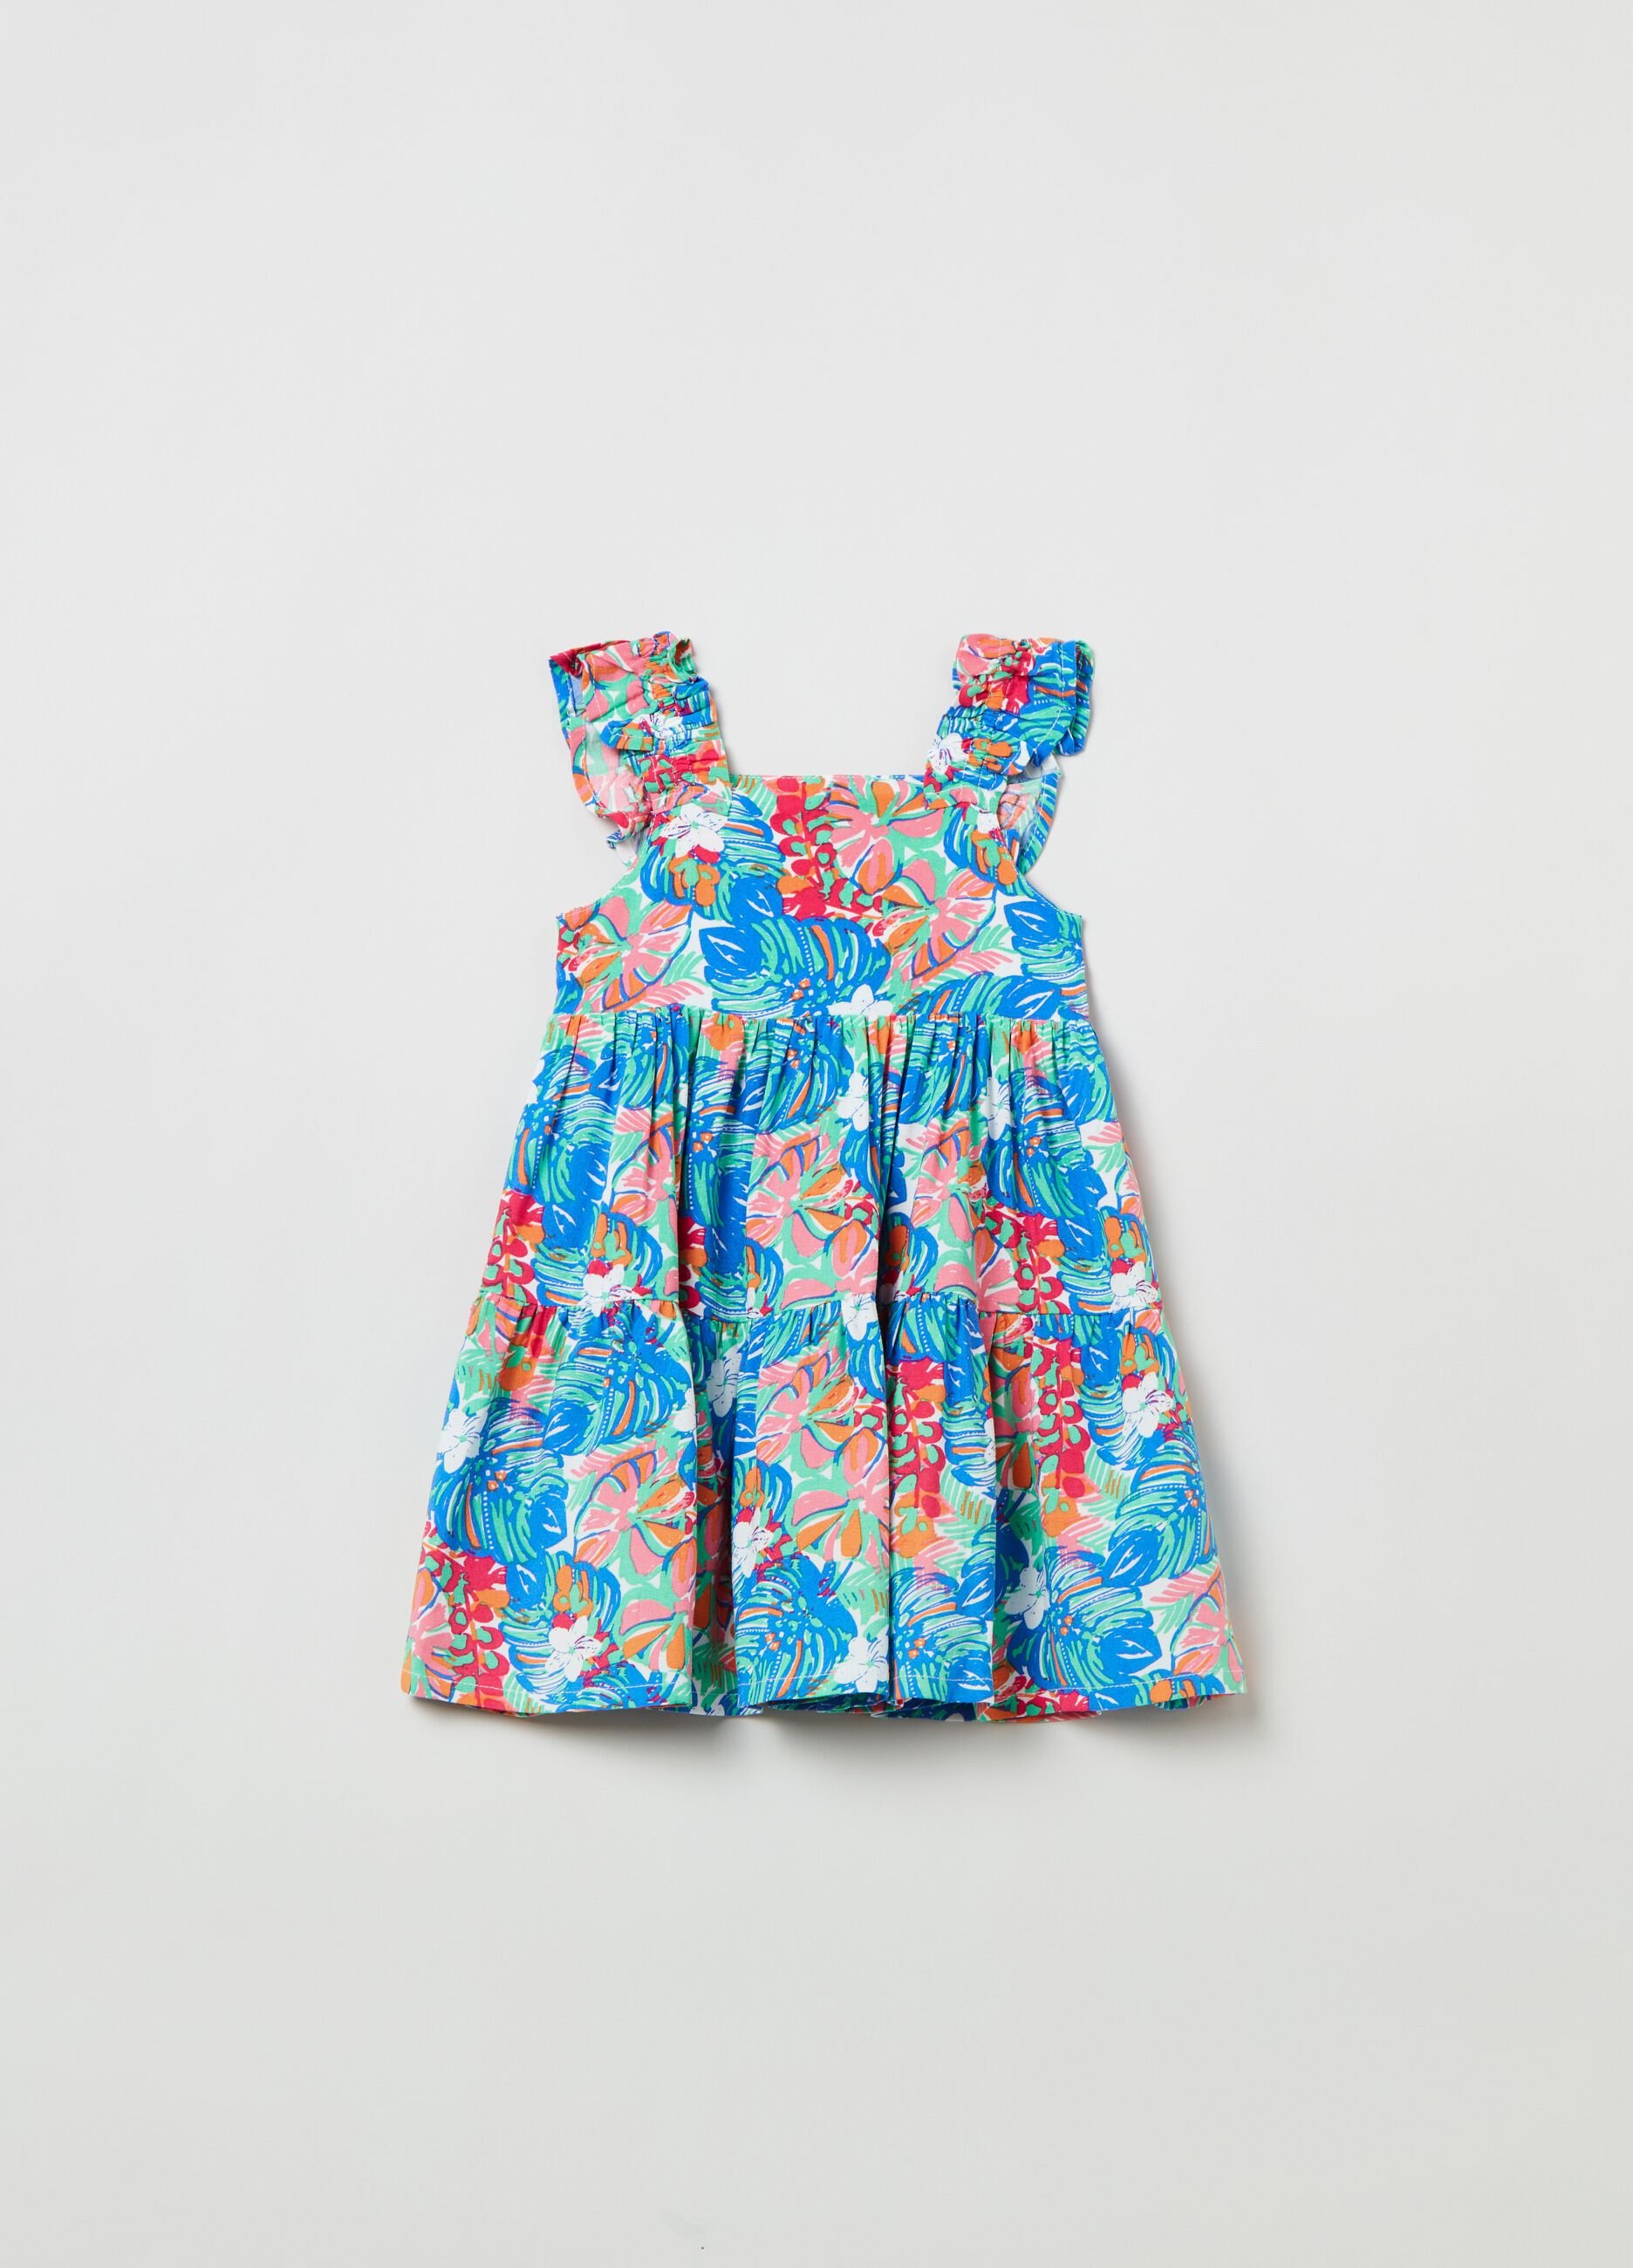 Tiered dress with floral print